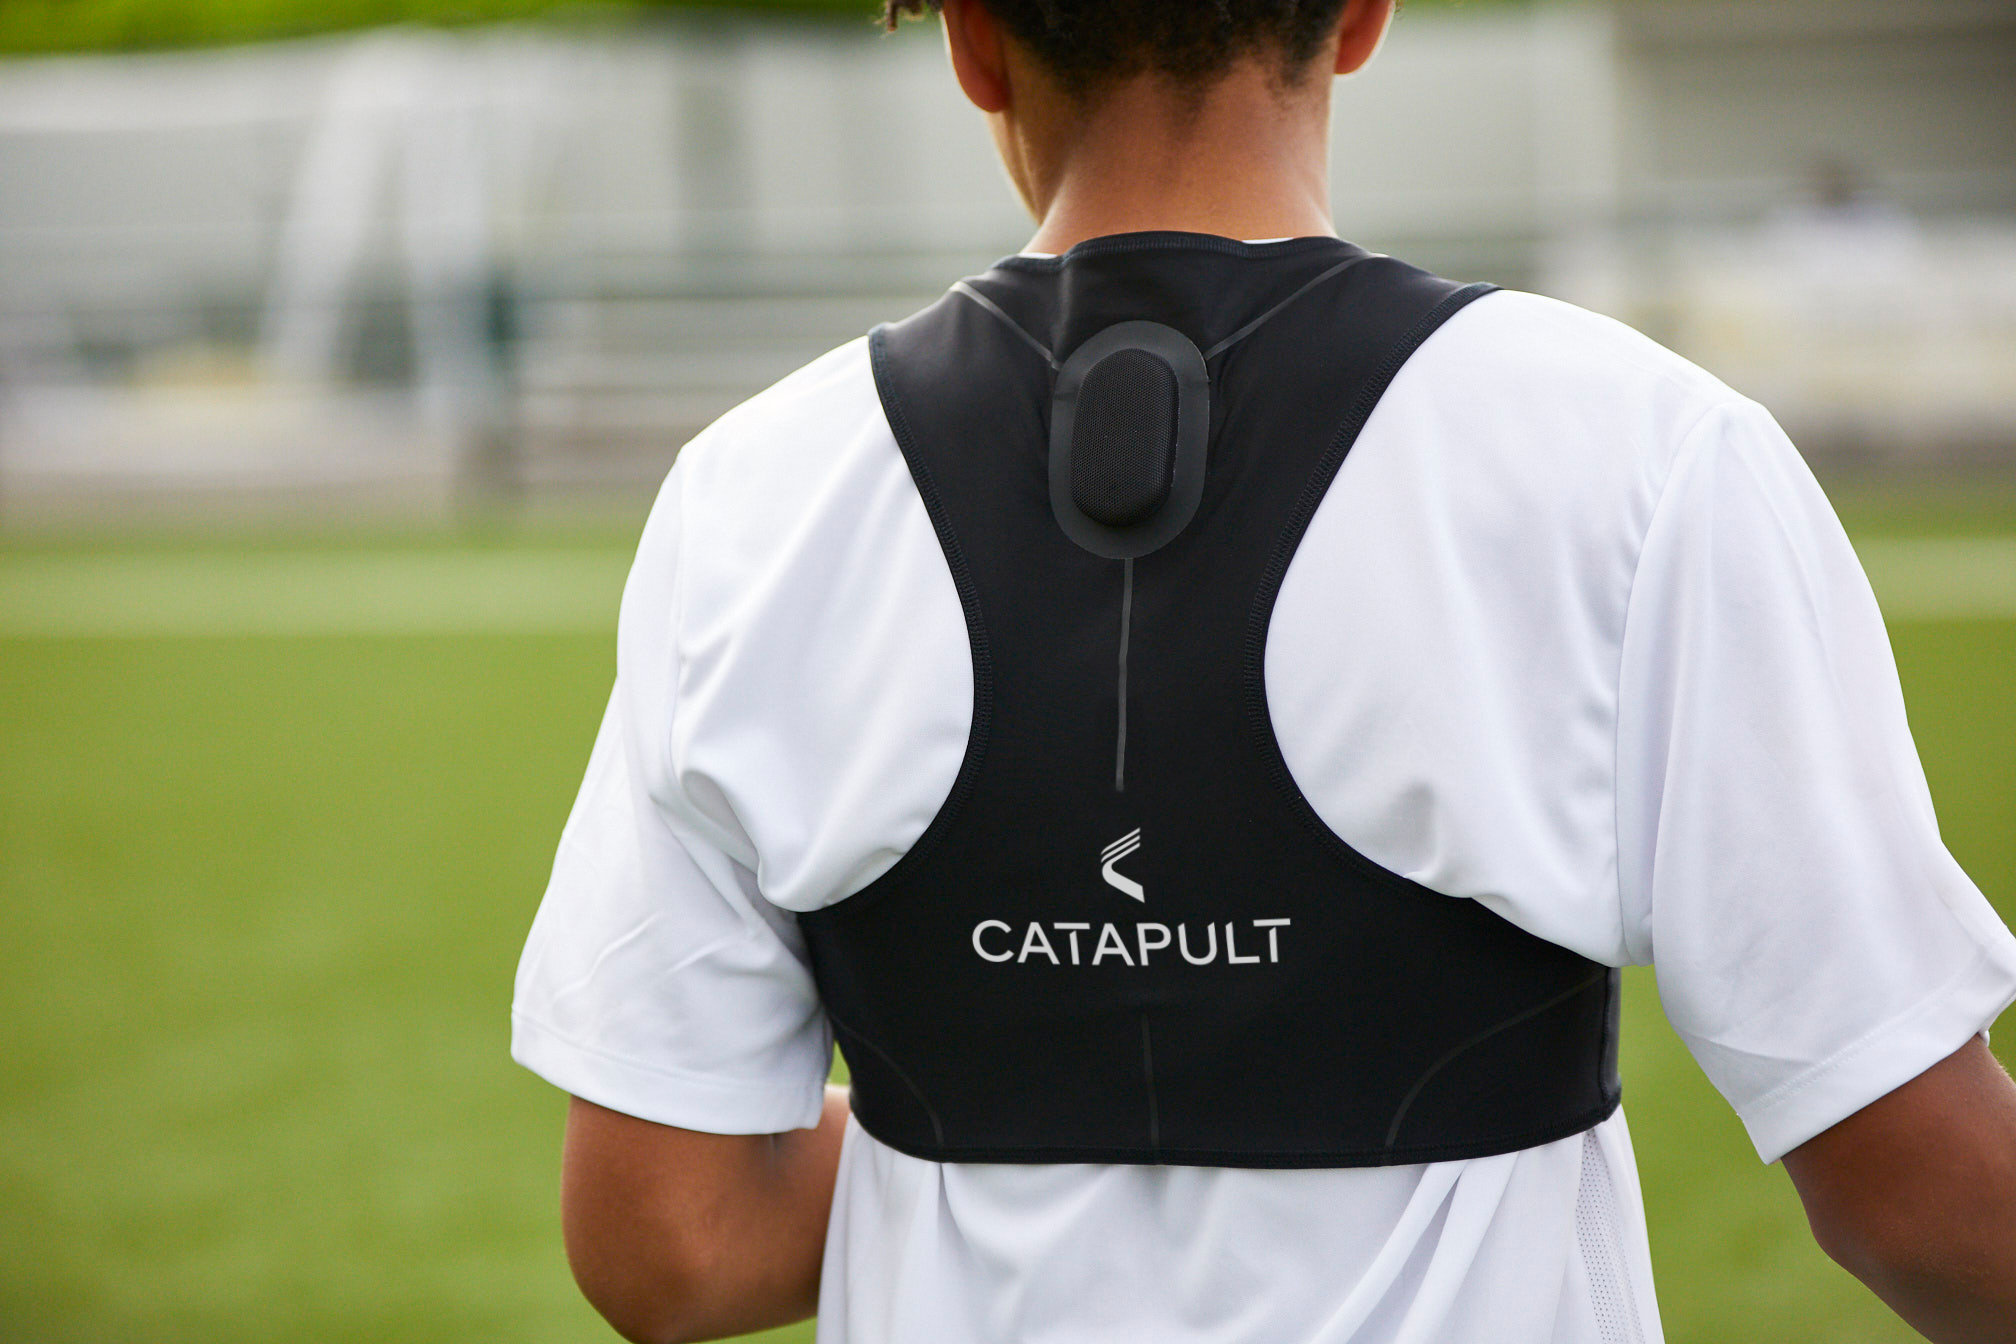 CATAPULT ONE - Track, Analyze, and Improve Your Soccer Performance  (Pre-Paid Membership)